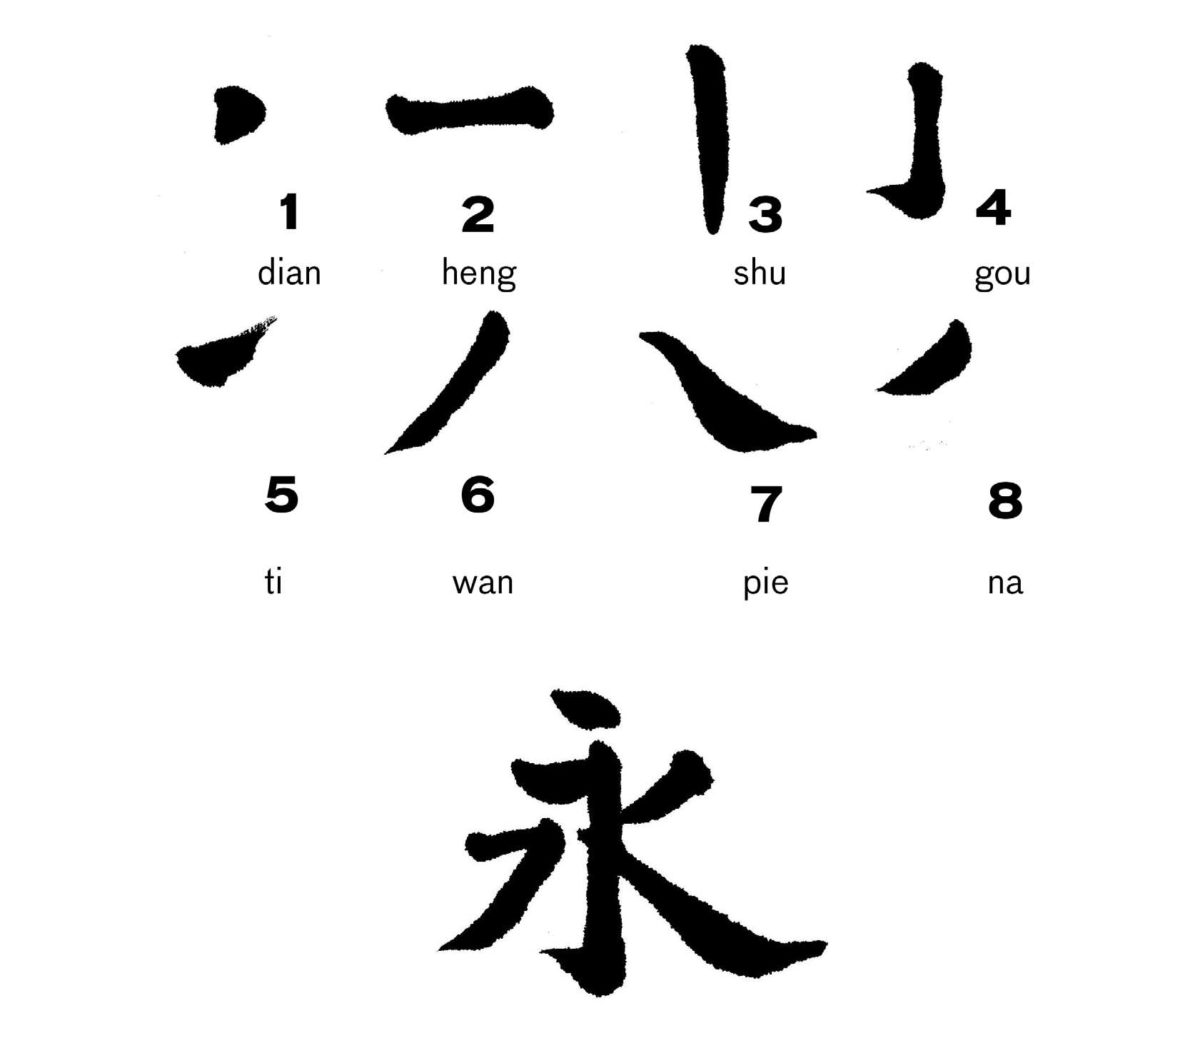 An Introduction to Chinese Character and Brushstrokes - Education - Asian  Art Museum